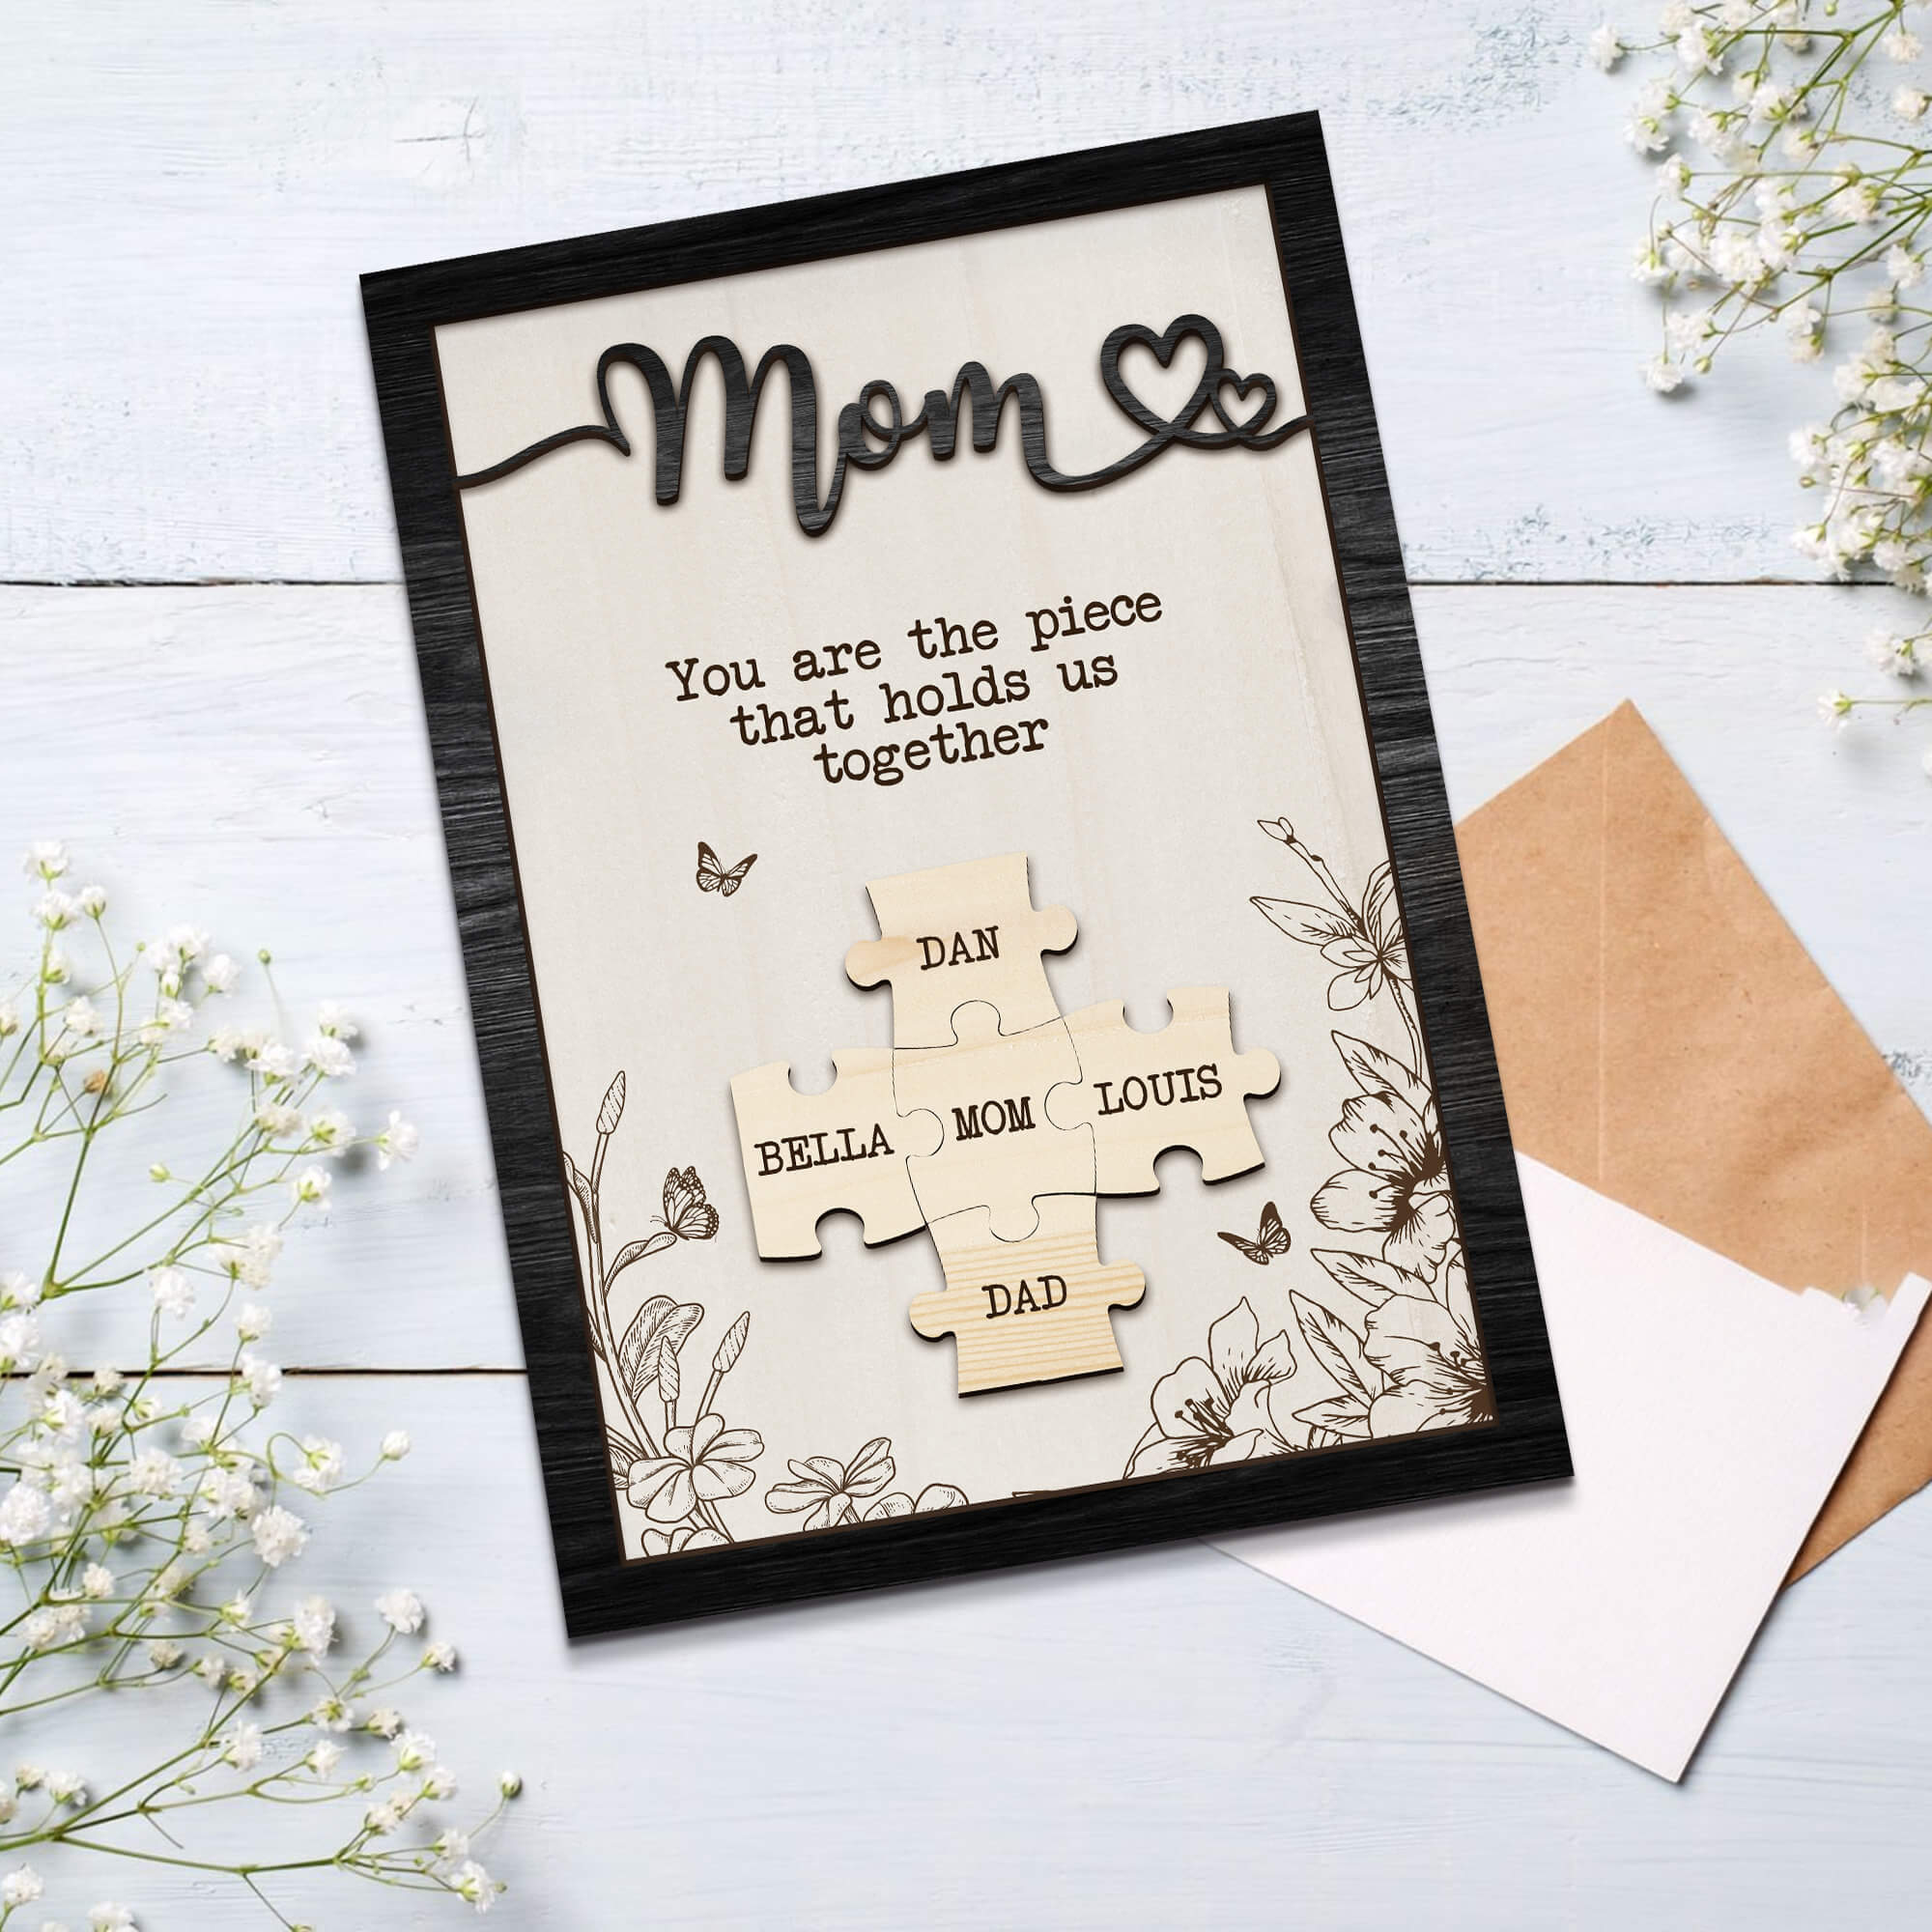 Personalized Mom Puzzle Sign,Piece That Holds Us Together Mother's Day Gift  (Customized free)